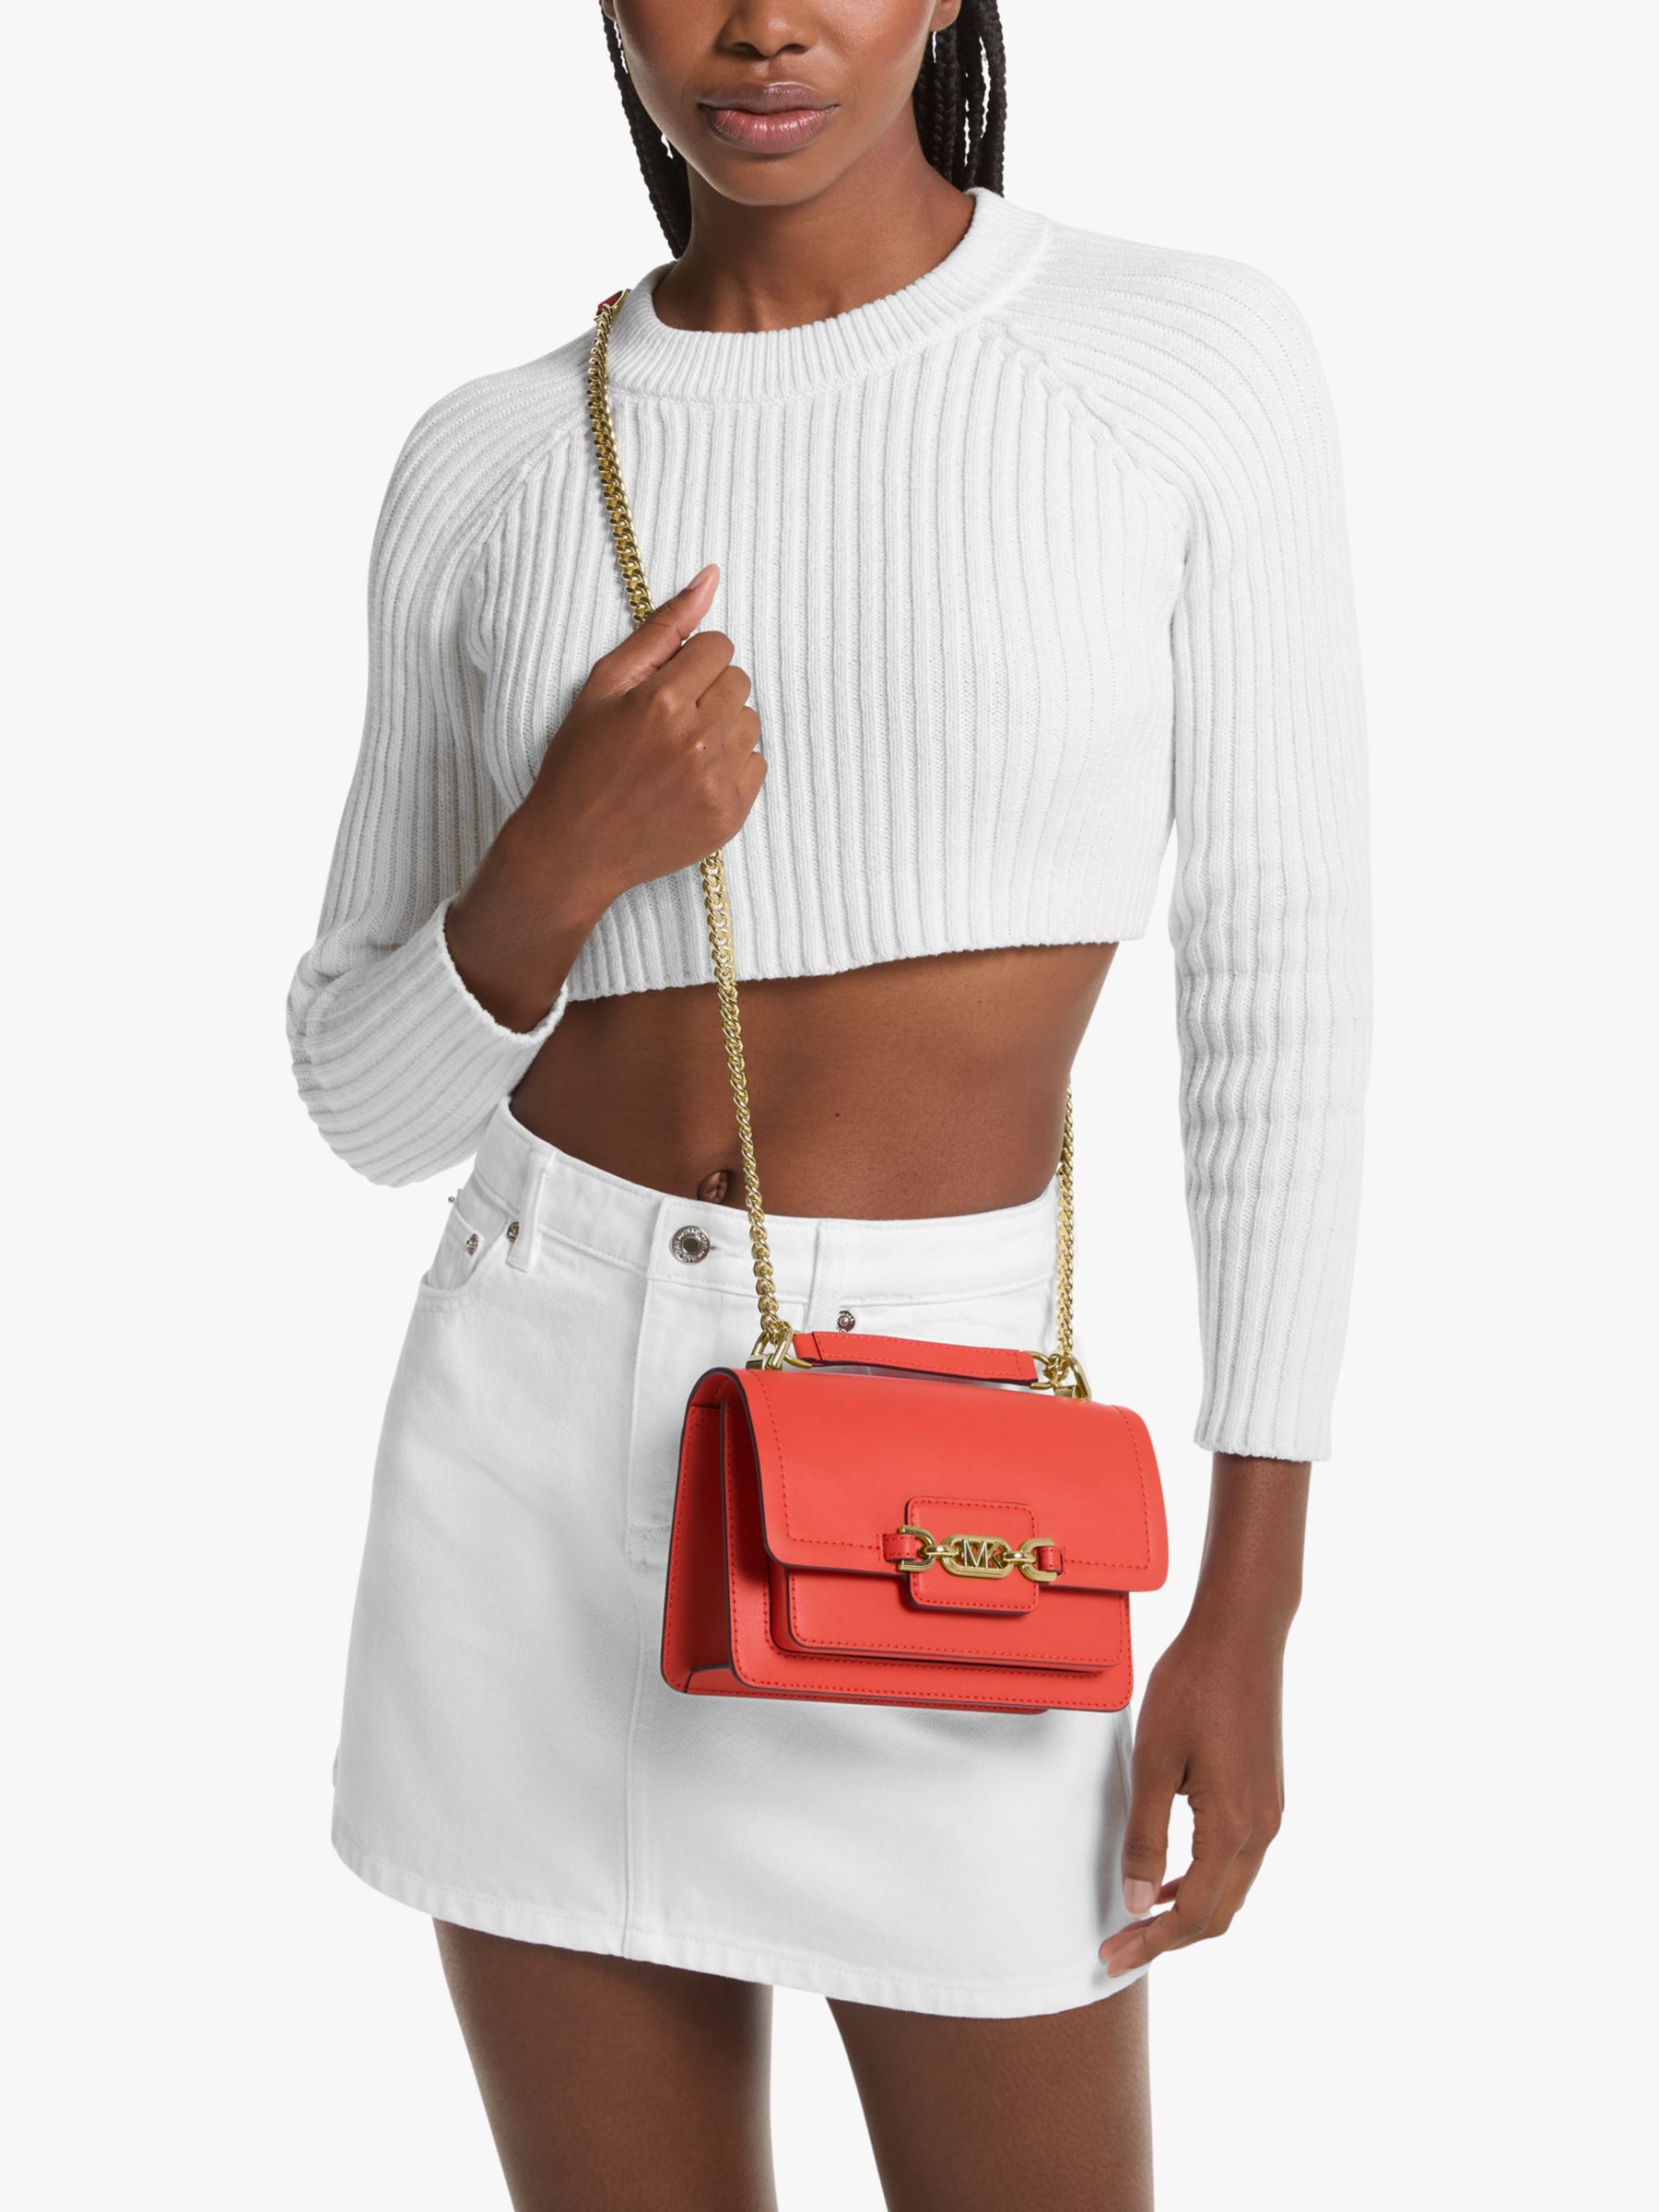 Buy Michael Kors Heather Small Leather Cross Body Bag, Spiced Coral Online at johnlewis.com